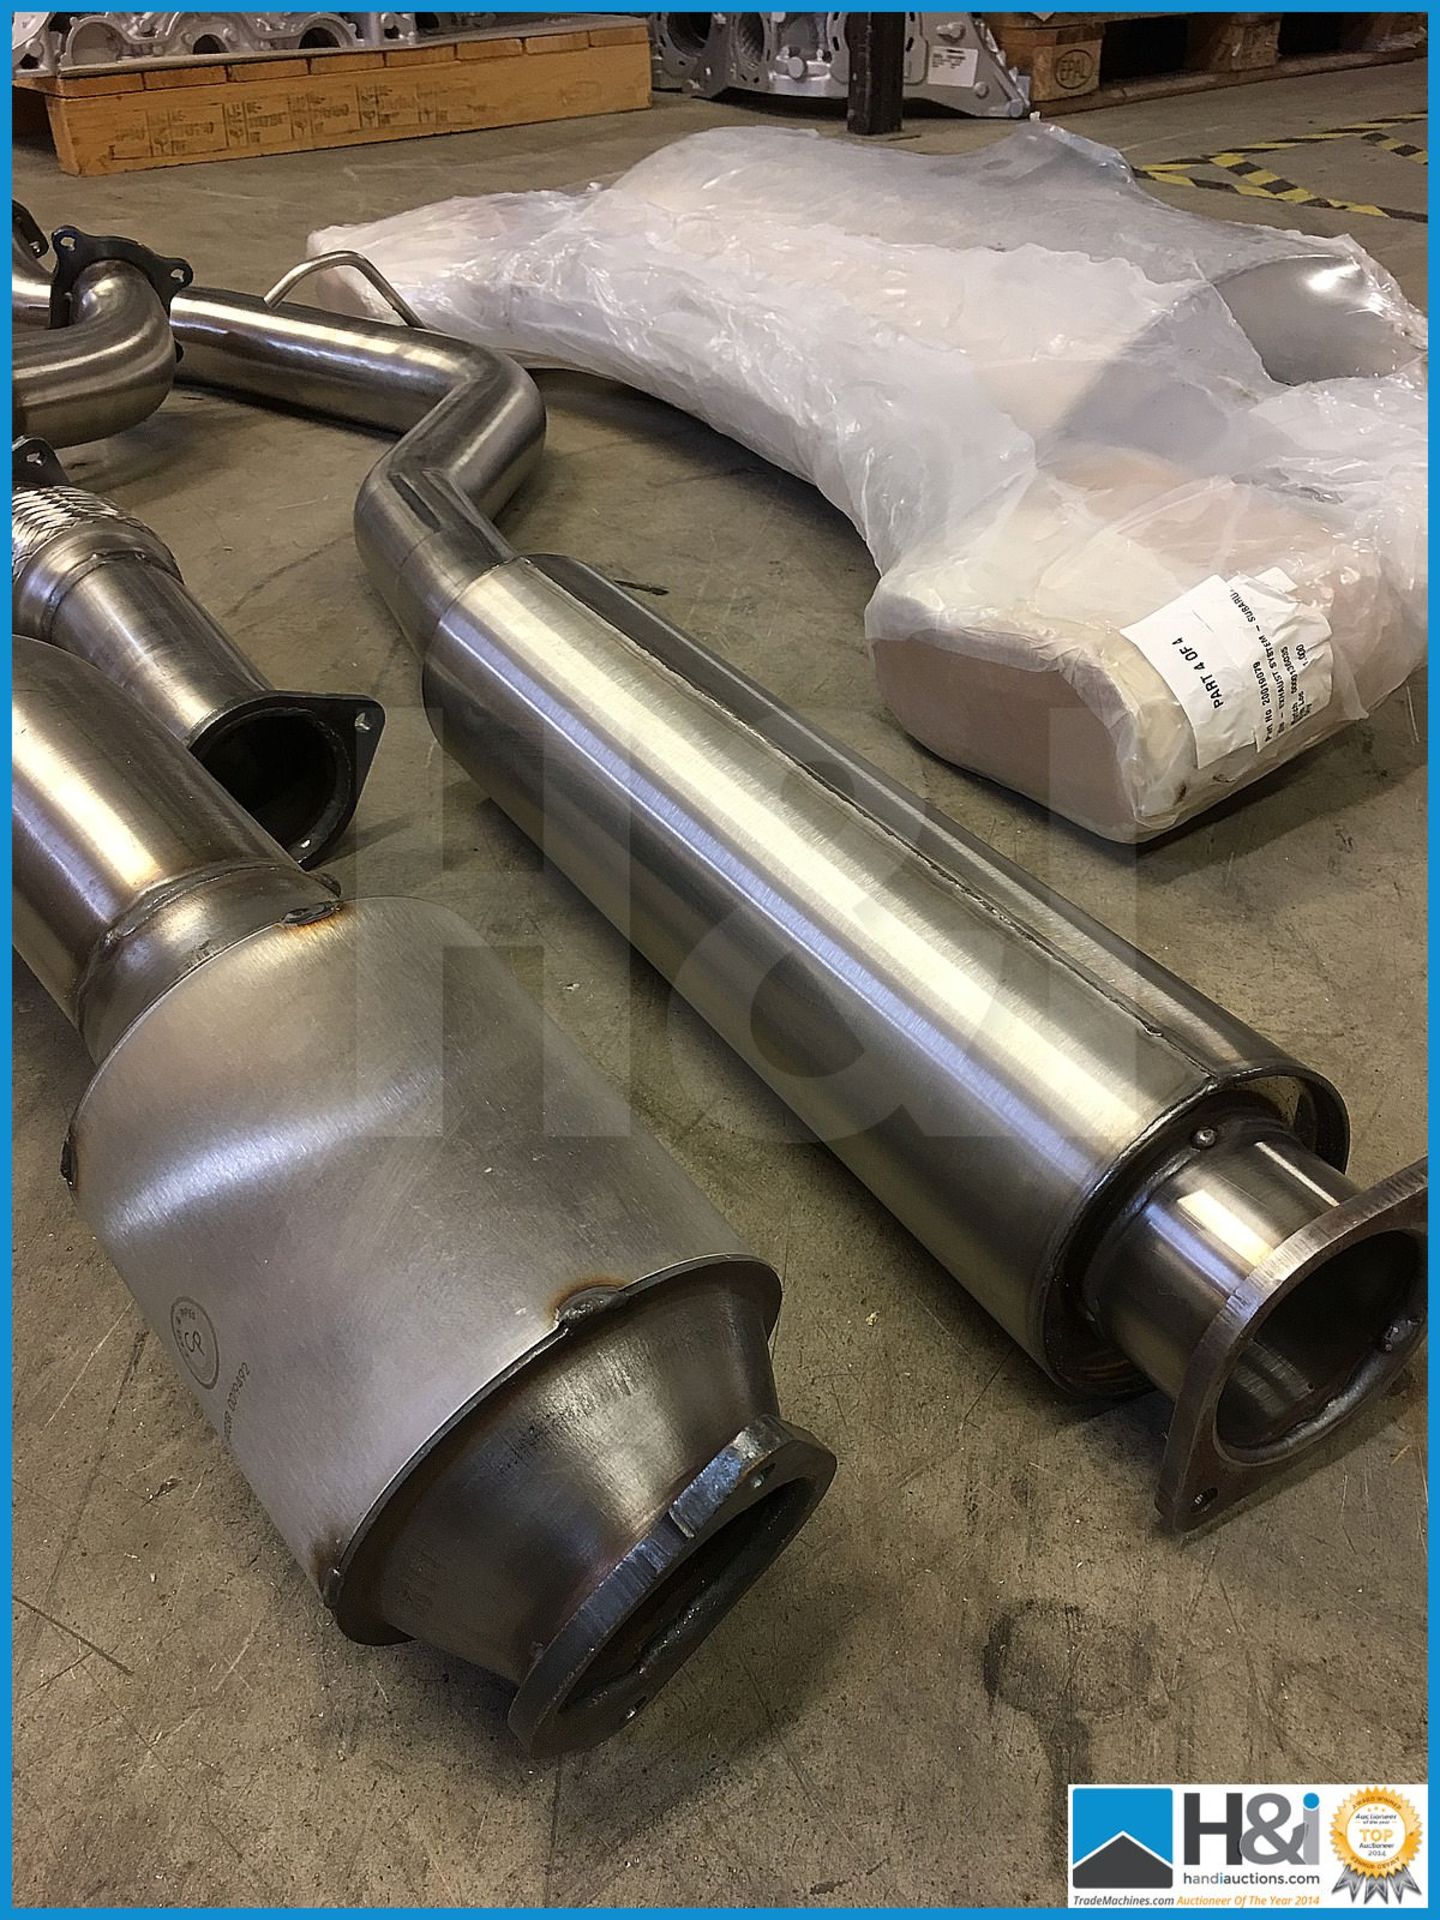 Subaru CS400 exhaust system. Last ones available in the world -- MC:N/A CILN:N/A - Image 4 of 6